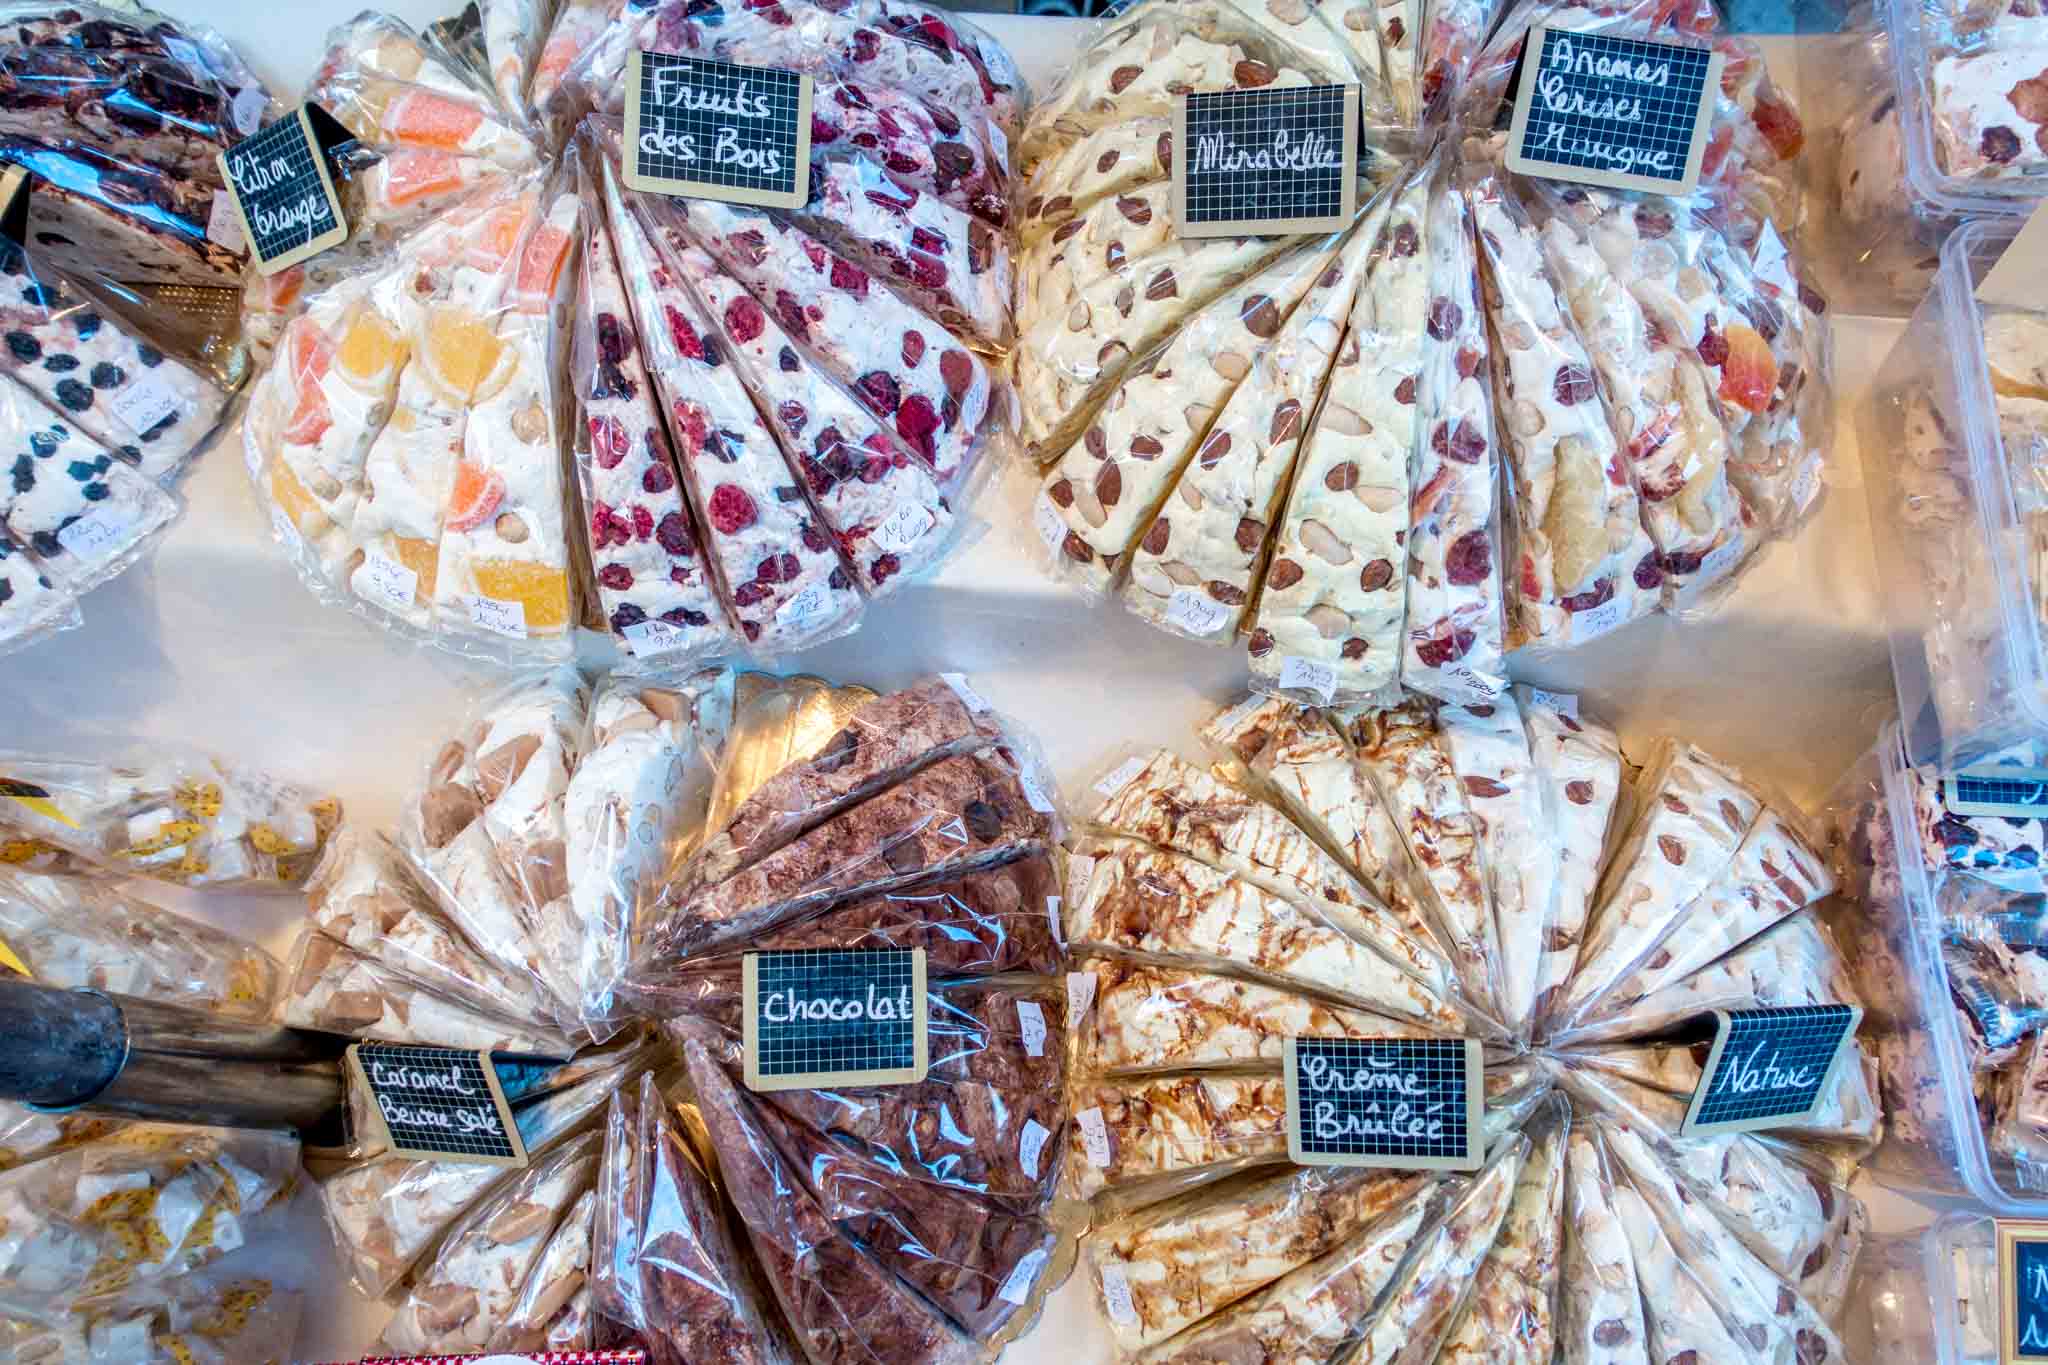 Slices of different flavors of nougat for sale